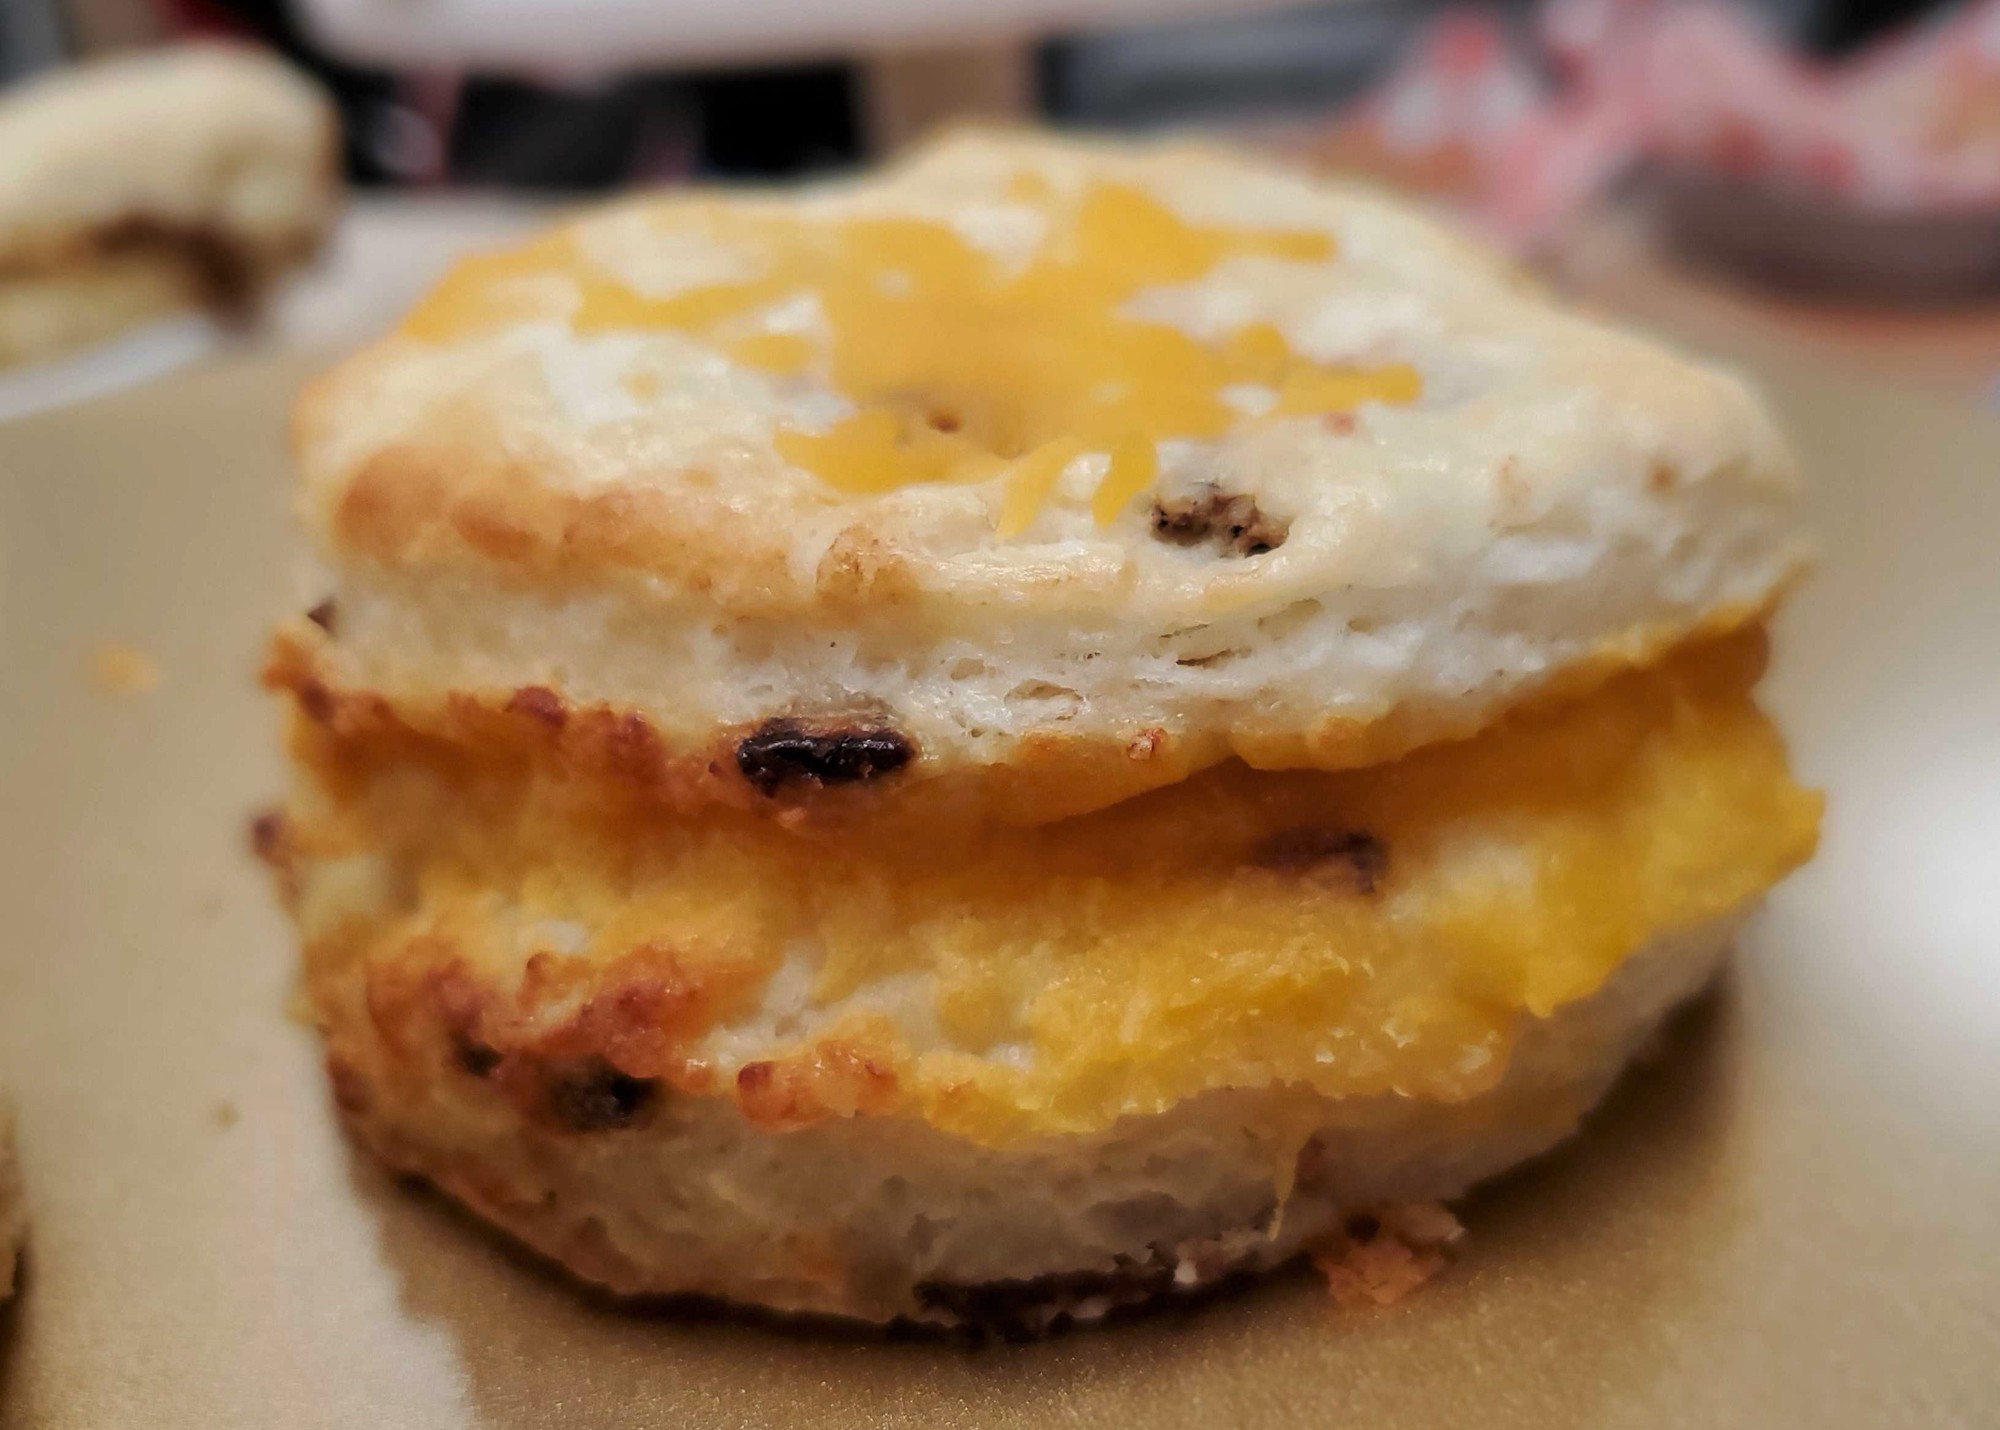 Bacon and cheddar biscuit from Betty & Earl's Biscuit Kitchen, Jason Matheson's new concept at Potluck food hall in Rosedale Center